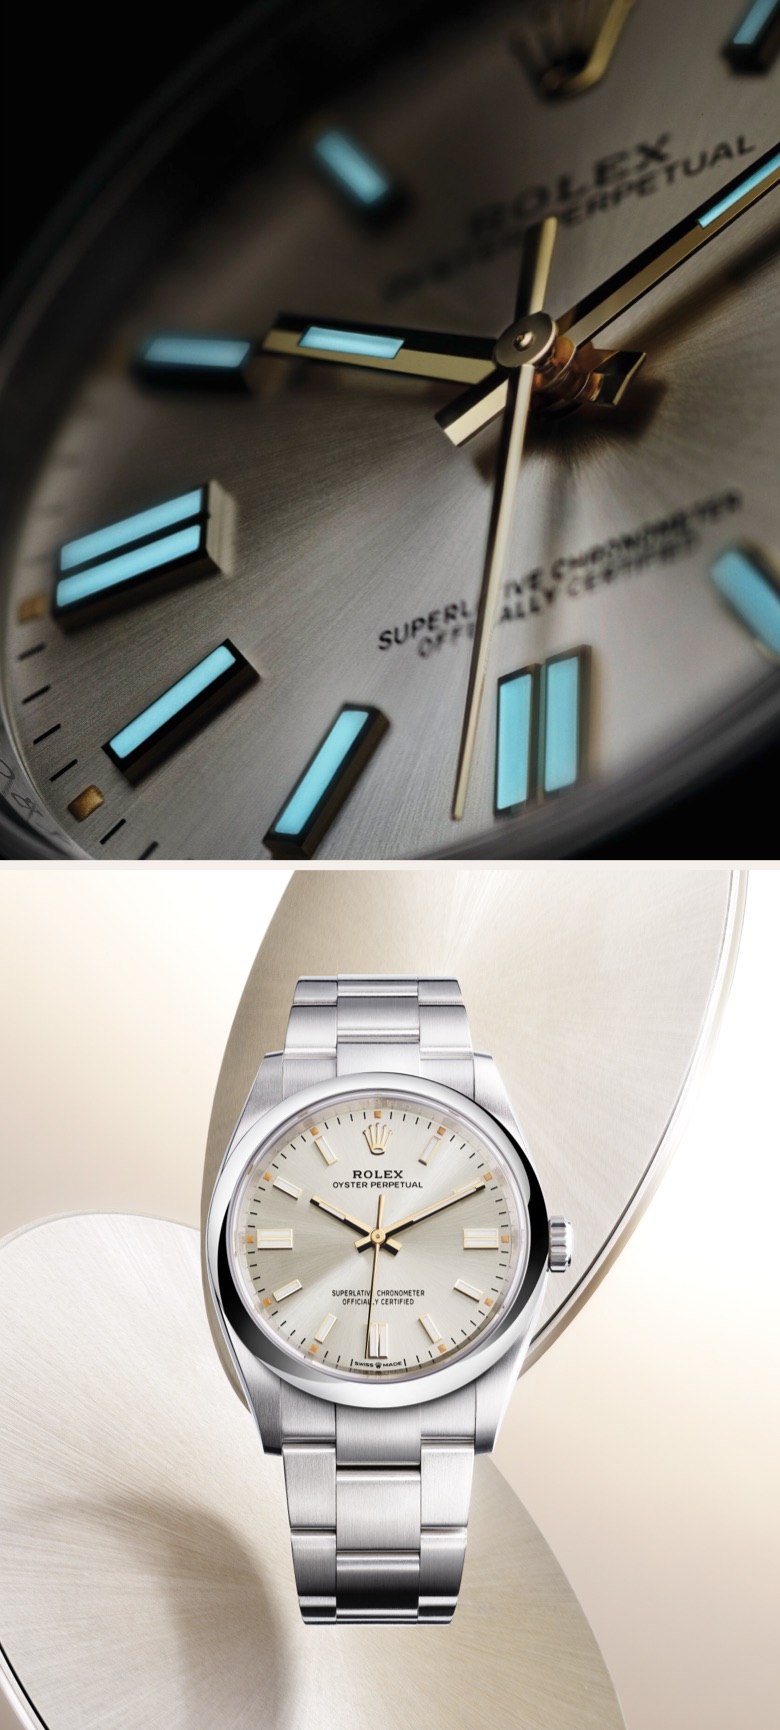 Rolex Oyster Perpetual watches 